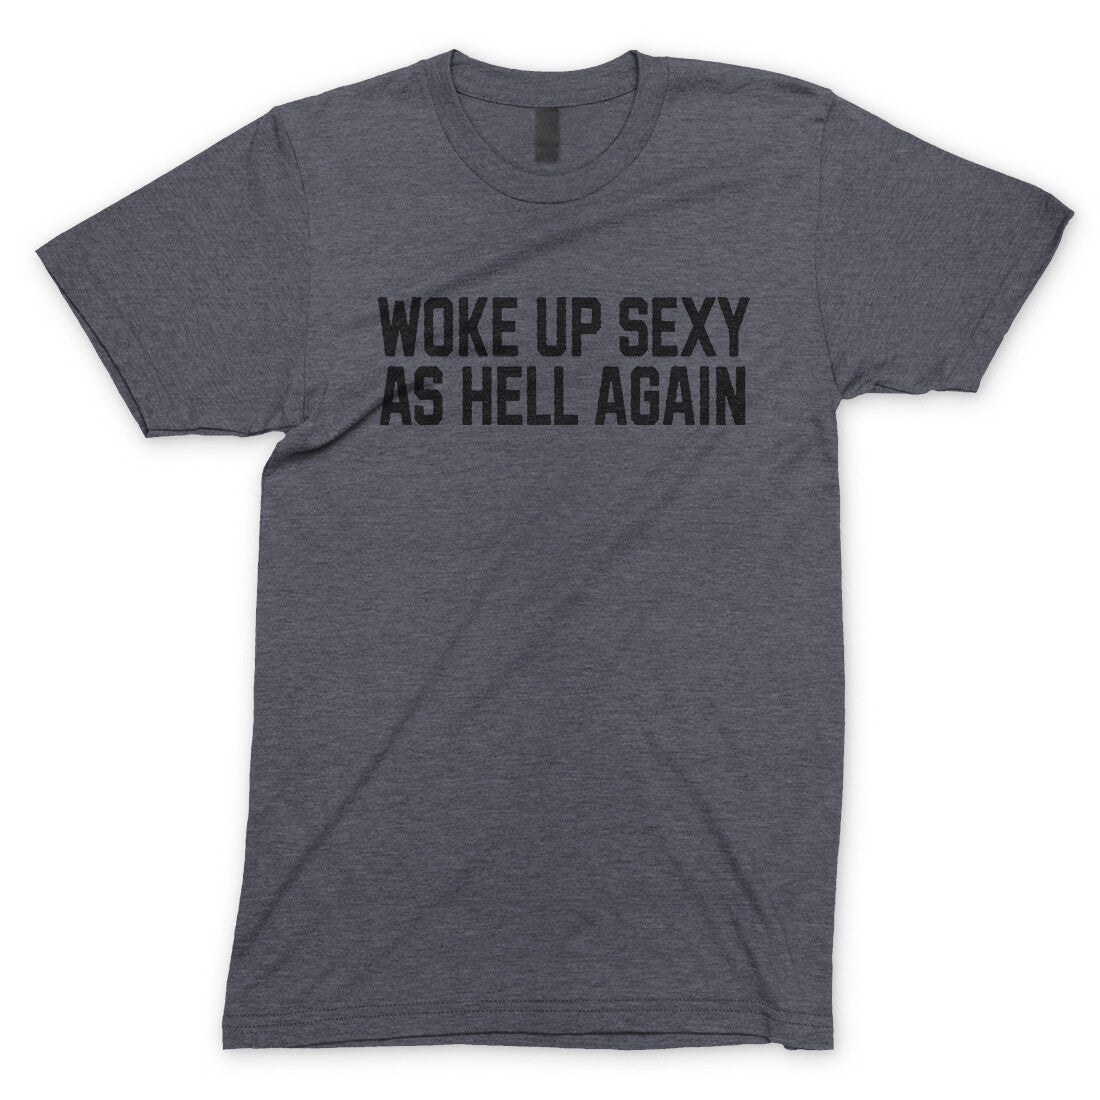 Woke Up Sexy as Hell in Dark Heather Color